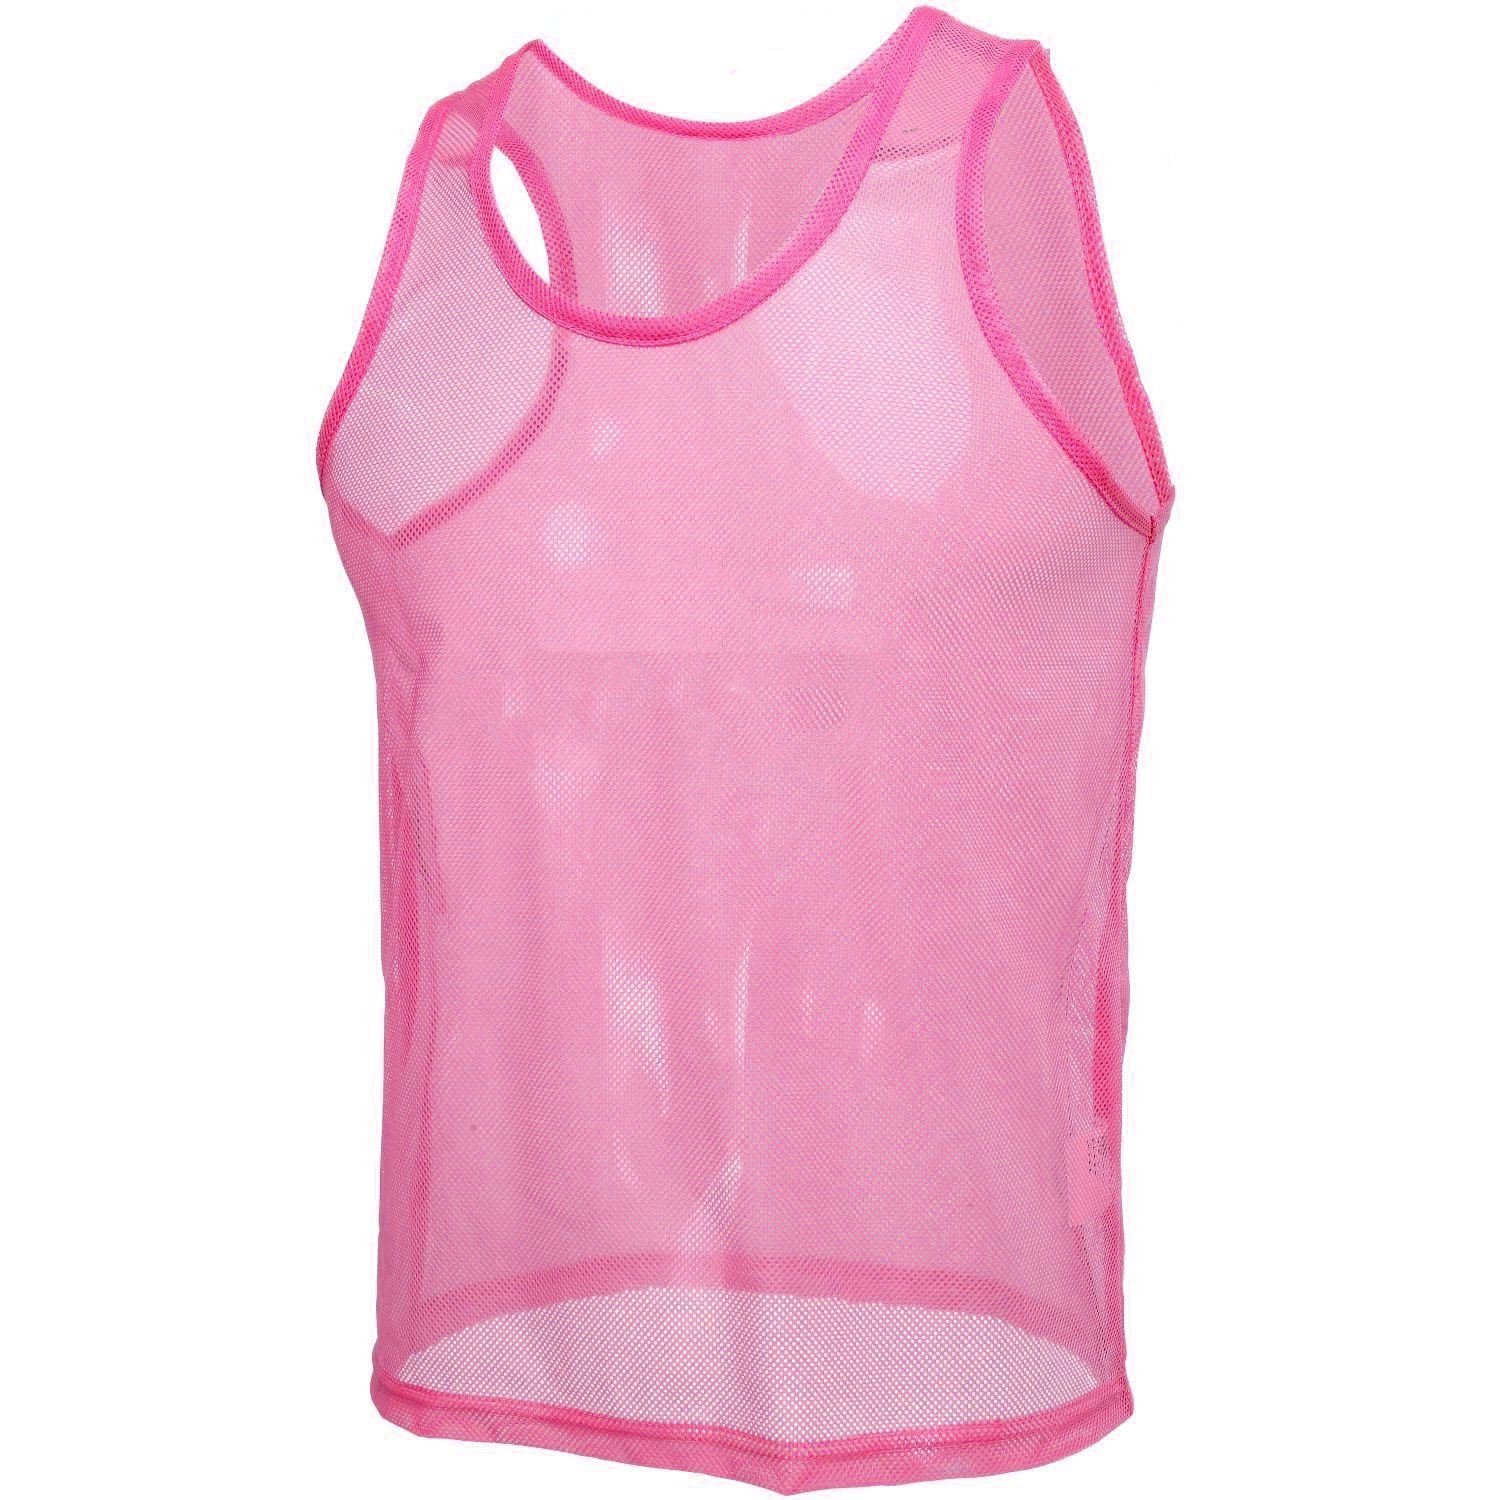 GK Team Practice Scrimmage Mesh Vests | Youth and Adult Vest Goal Kick Soccer Small Pink 